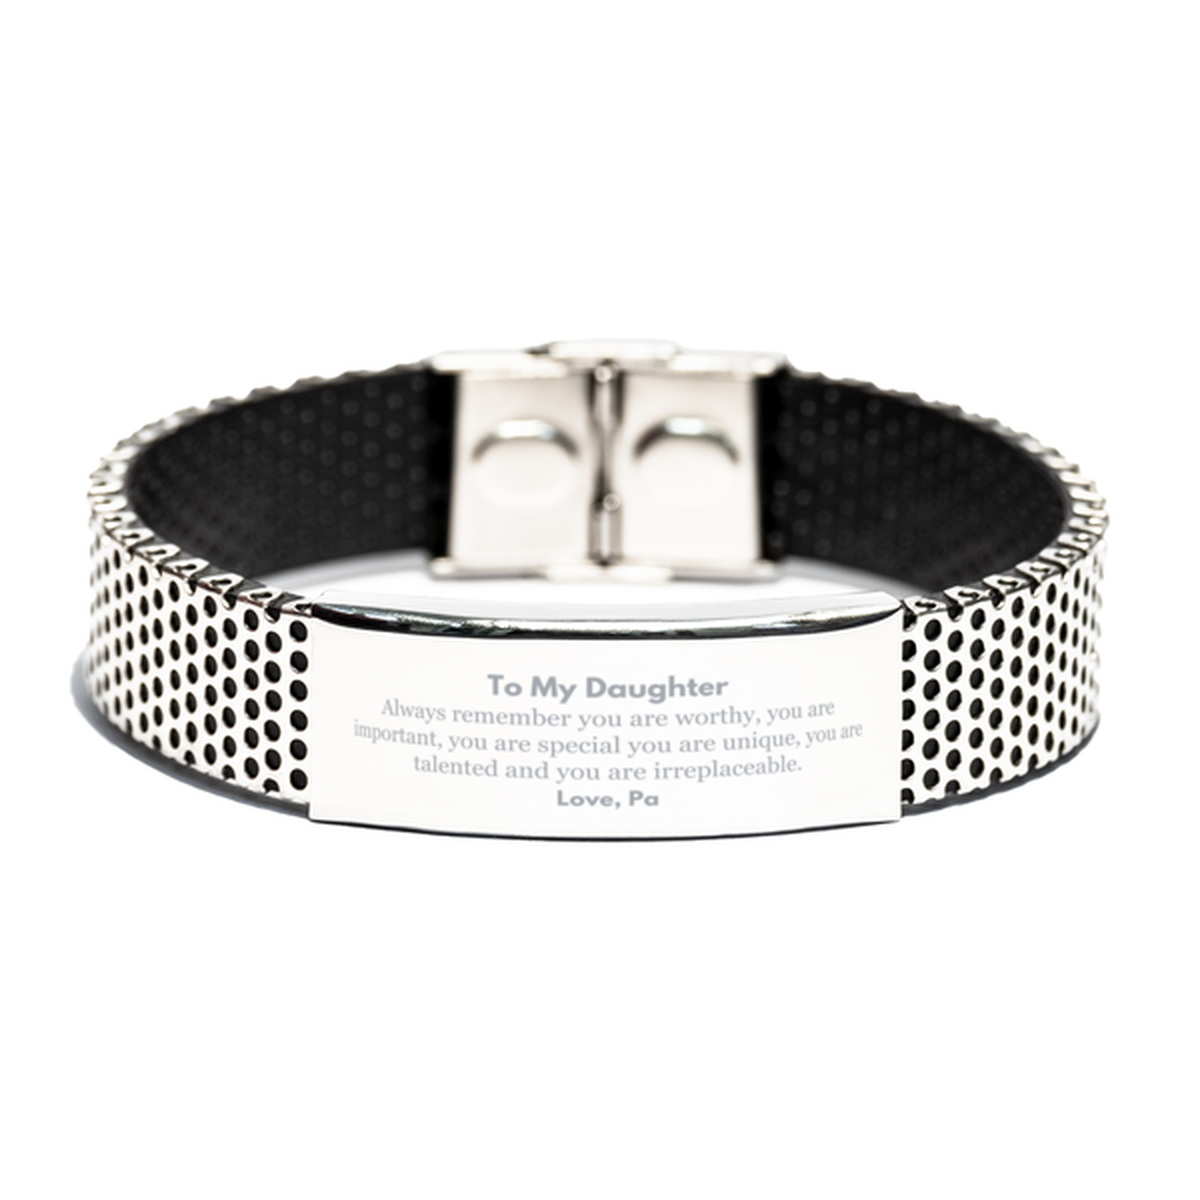 Daughter Birthday Gifts from Pa, Inspirational Stainless Steel Bracelet for Daughter Christmas Graduation Gifts for Daughter Always remember you are worthy, you are important. Love, Pa